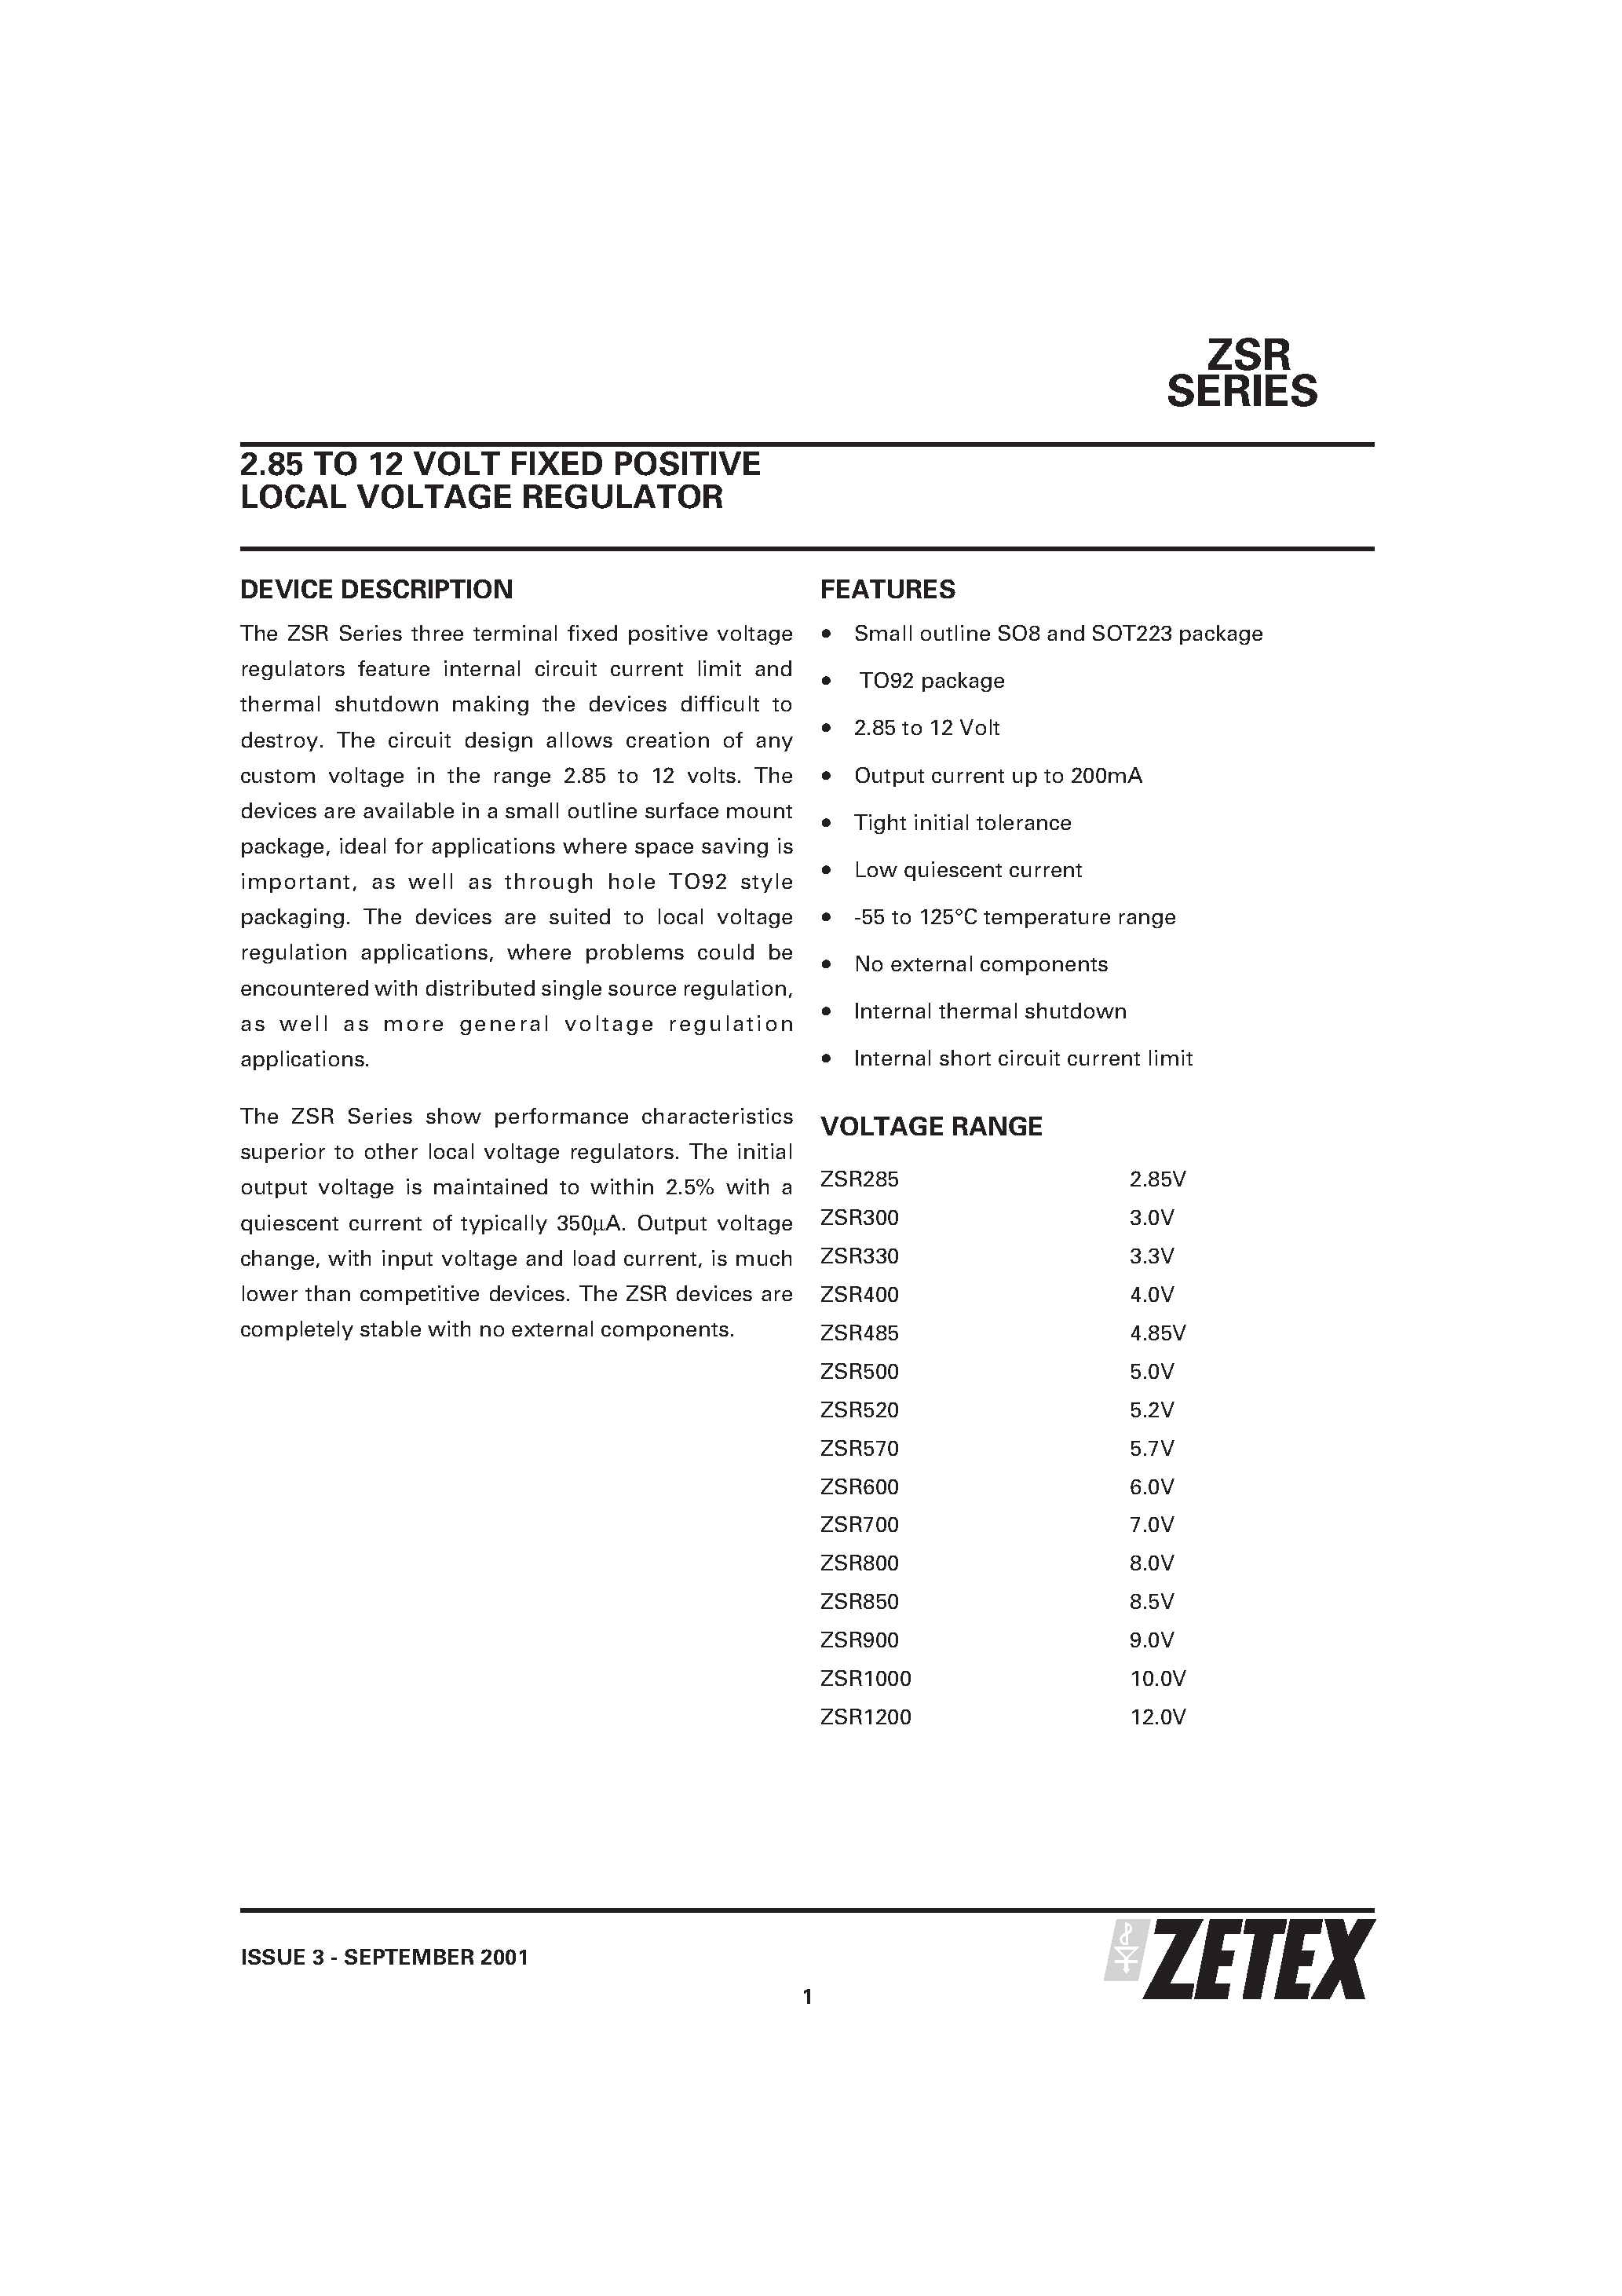 Datasheet ZSR400 - 2.85 TO 12 VOLT FIXED POSITIVE LOCAL VOLTAGE REGULATOR page 1